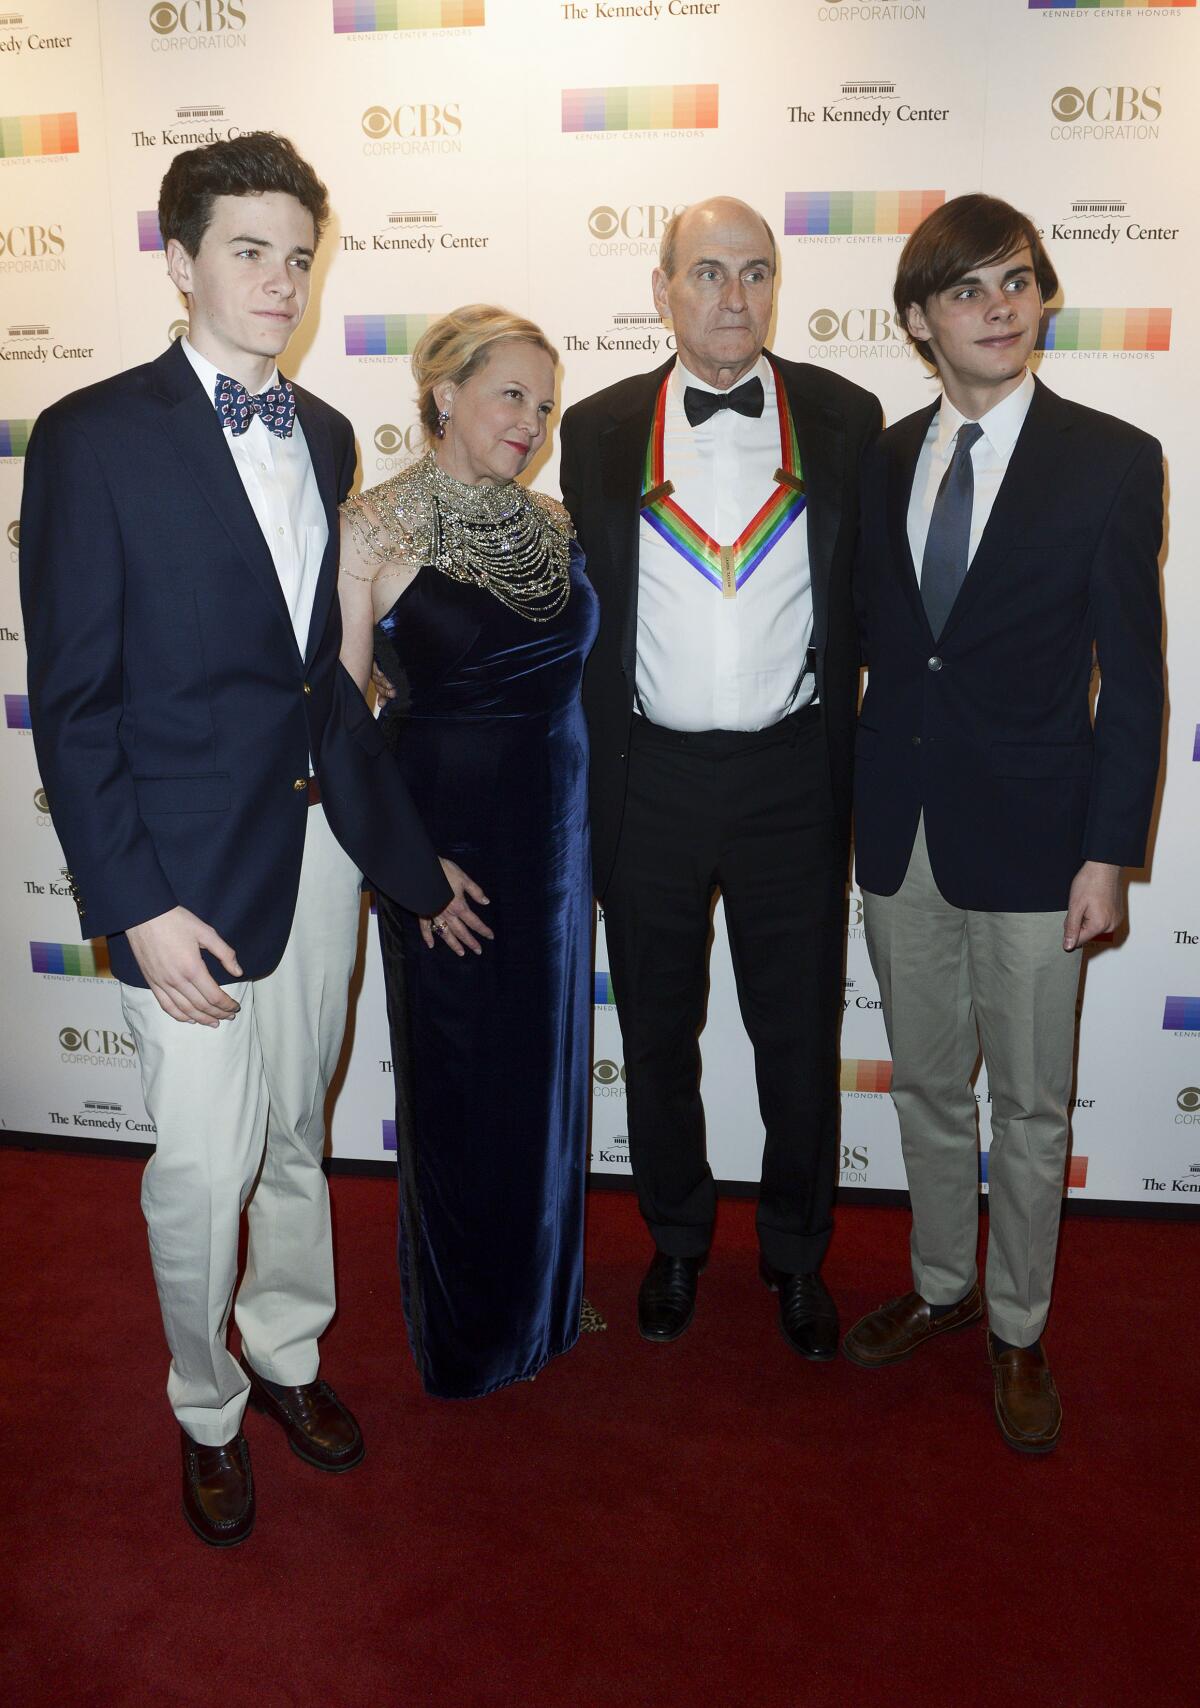 39th annual Kennedy Center Honors